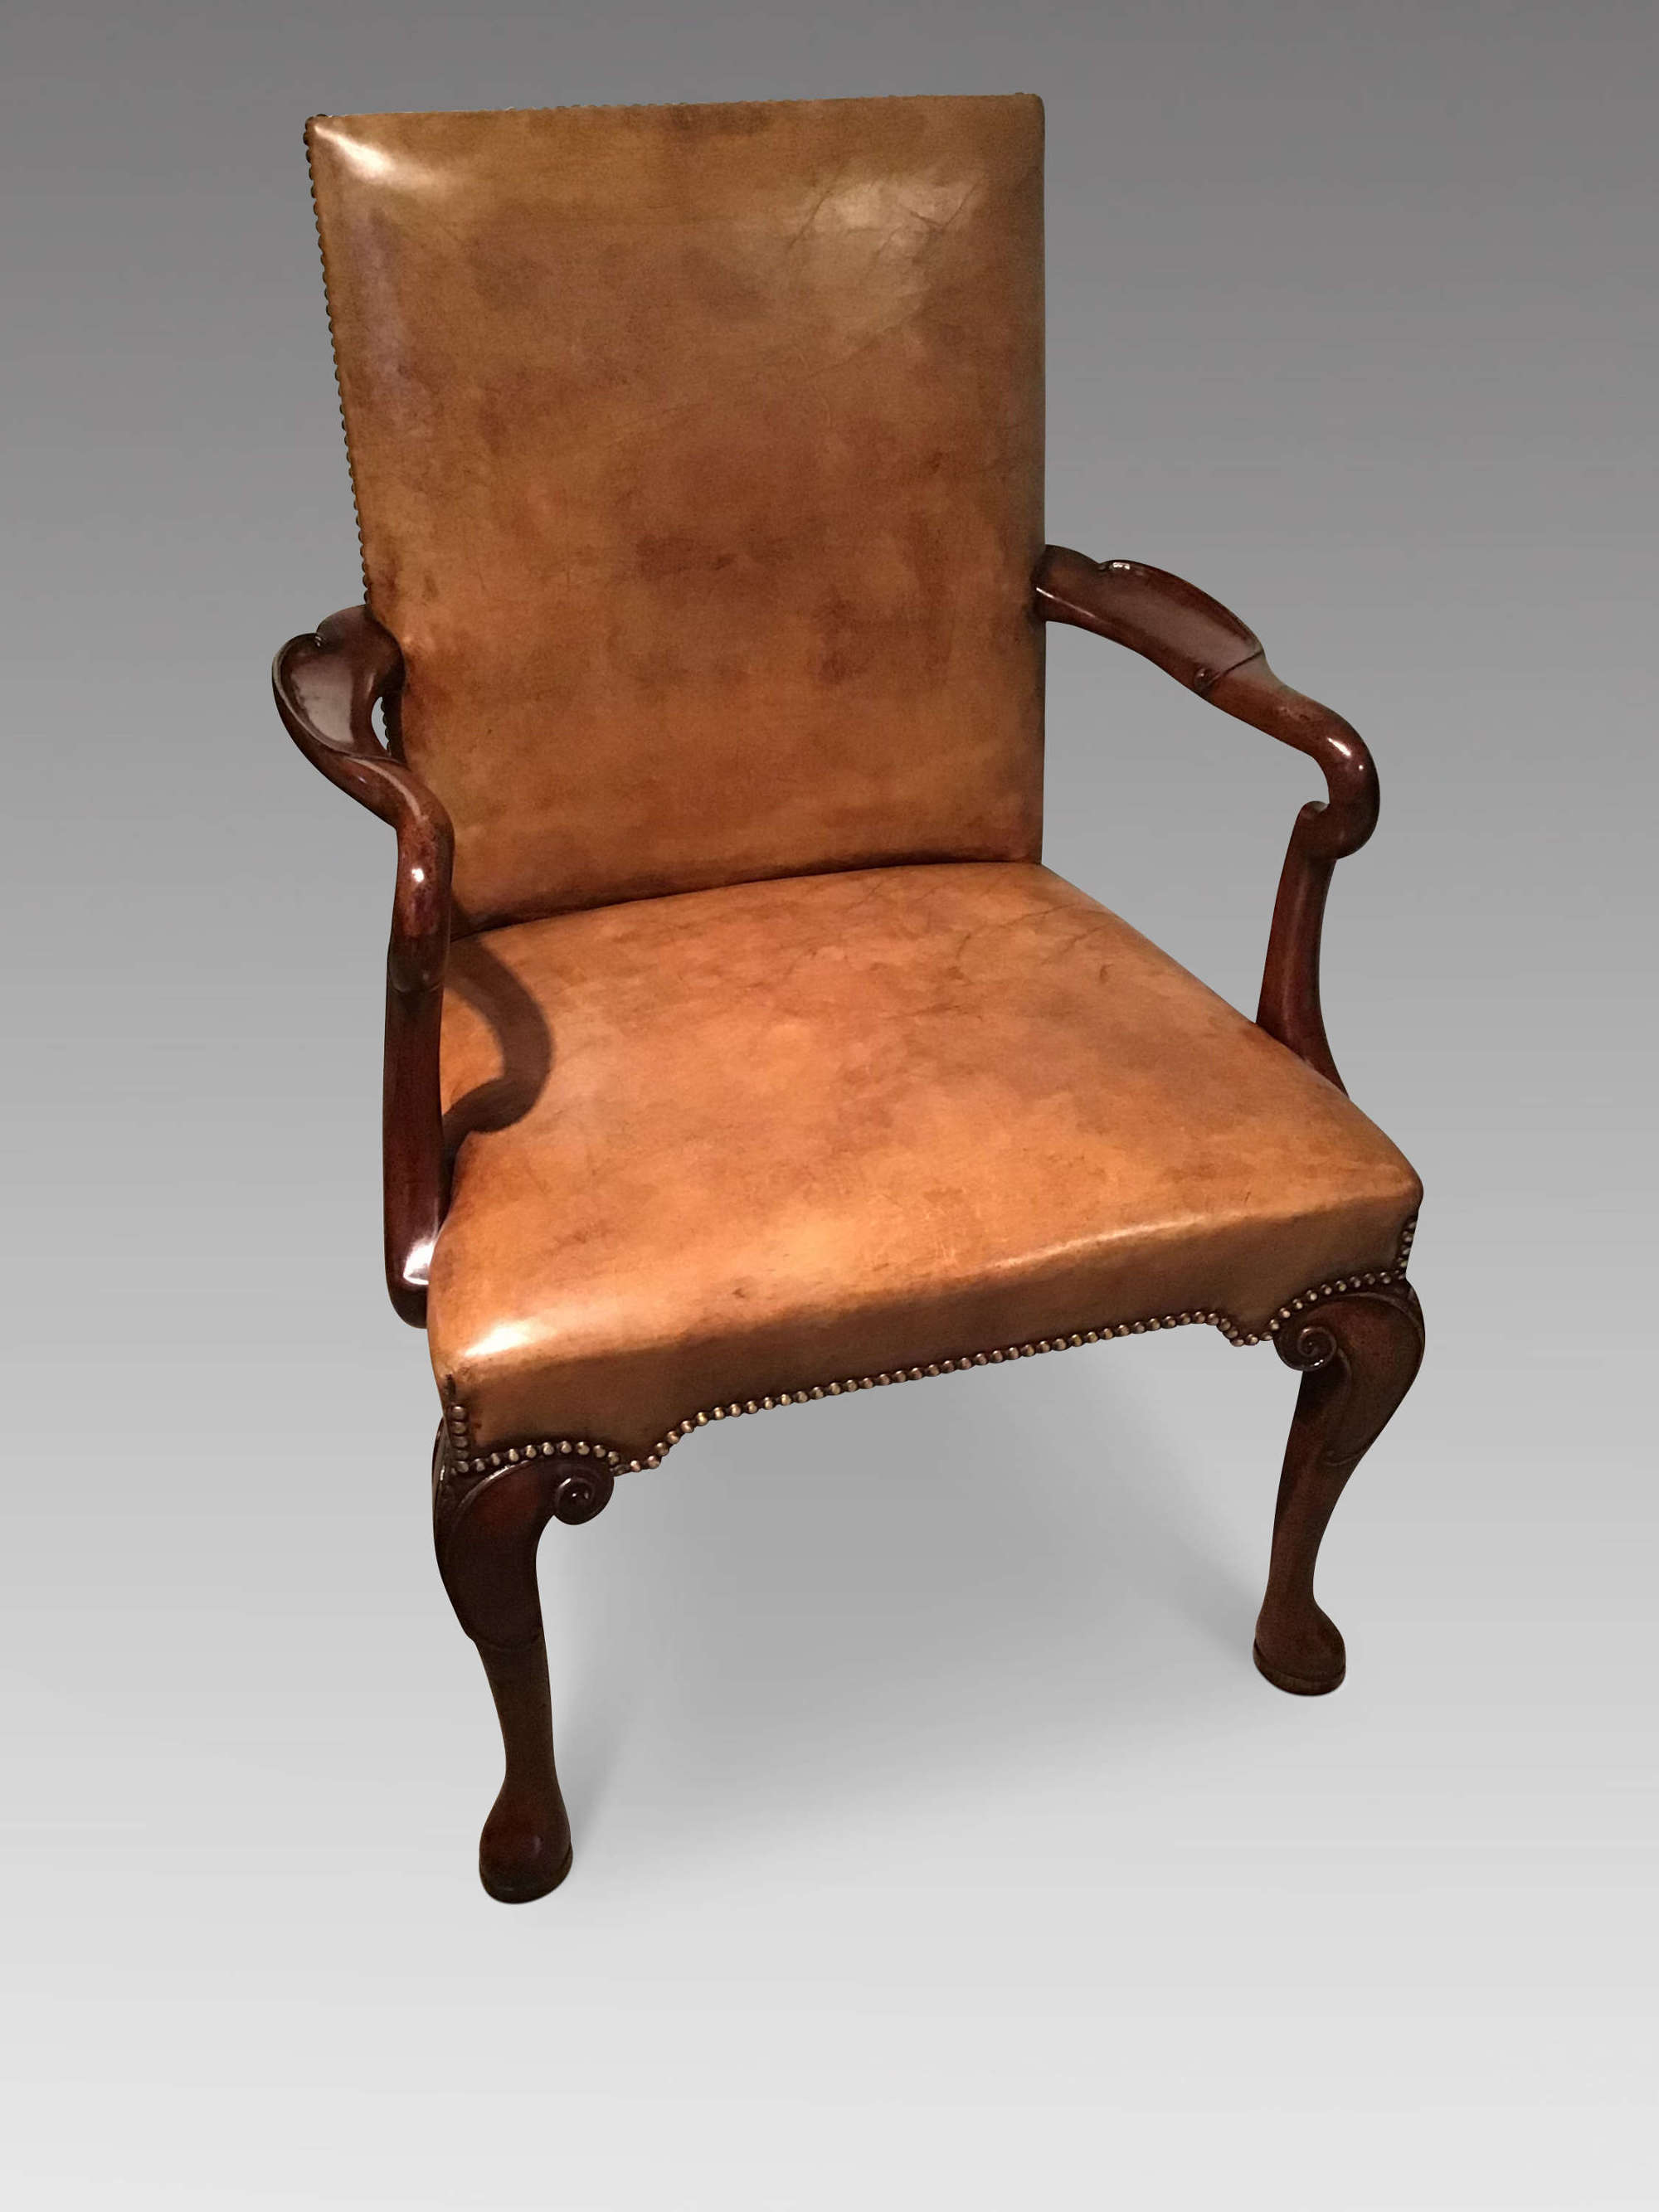 Mahogany and leather open armchair